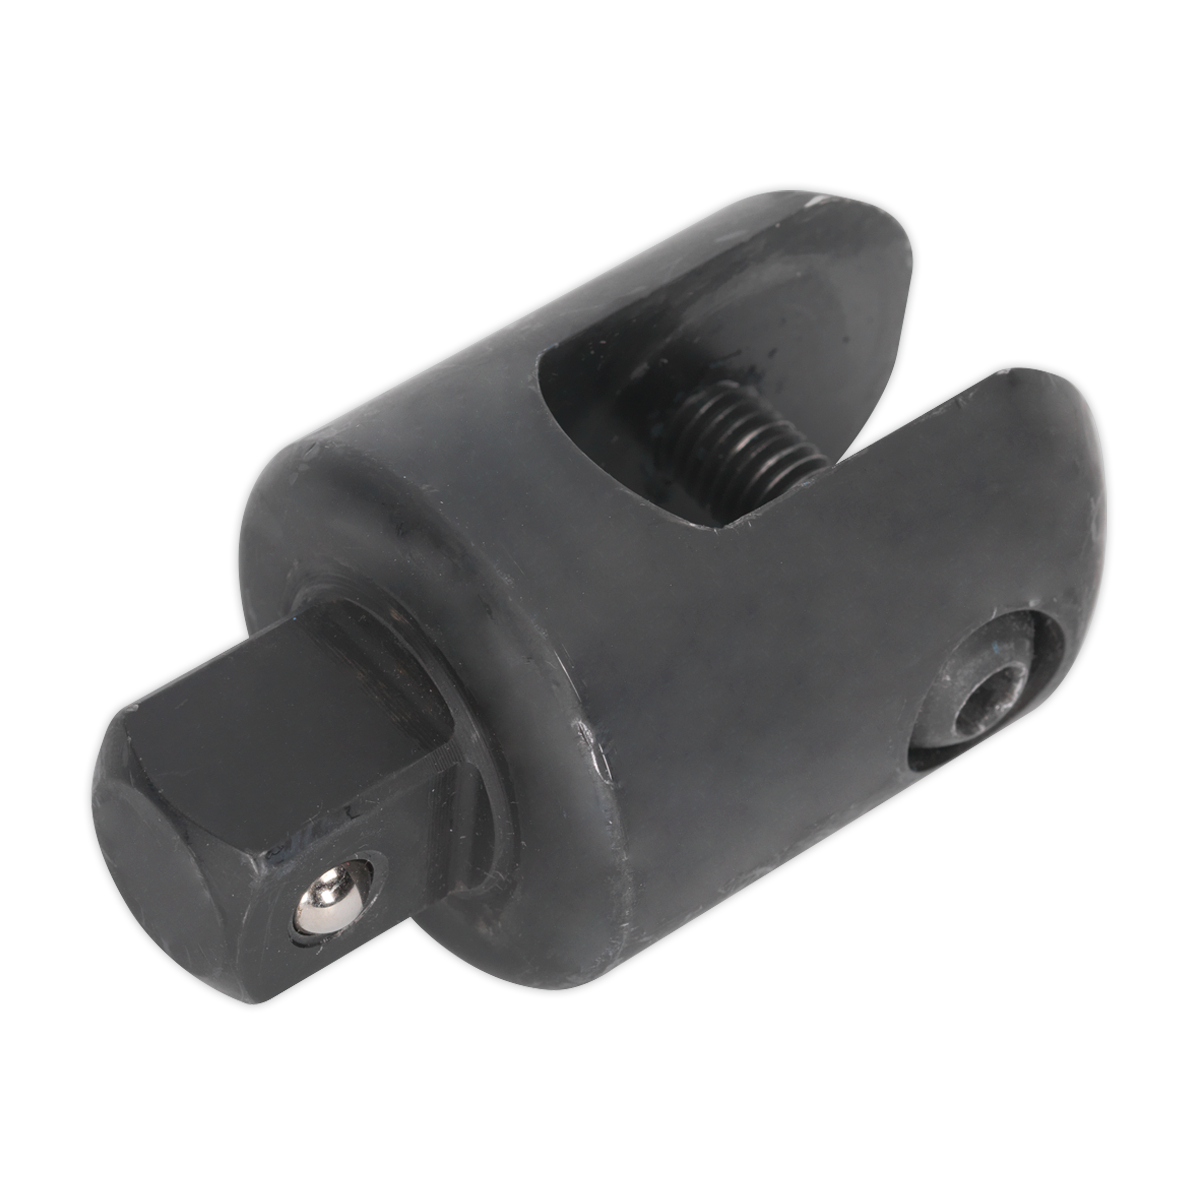 Sealey Knuckle 3/4"Sq Drive for AK7312